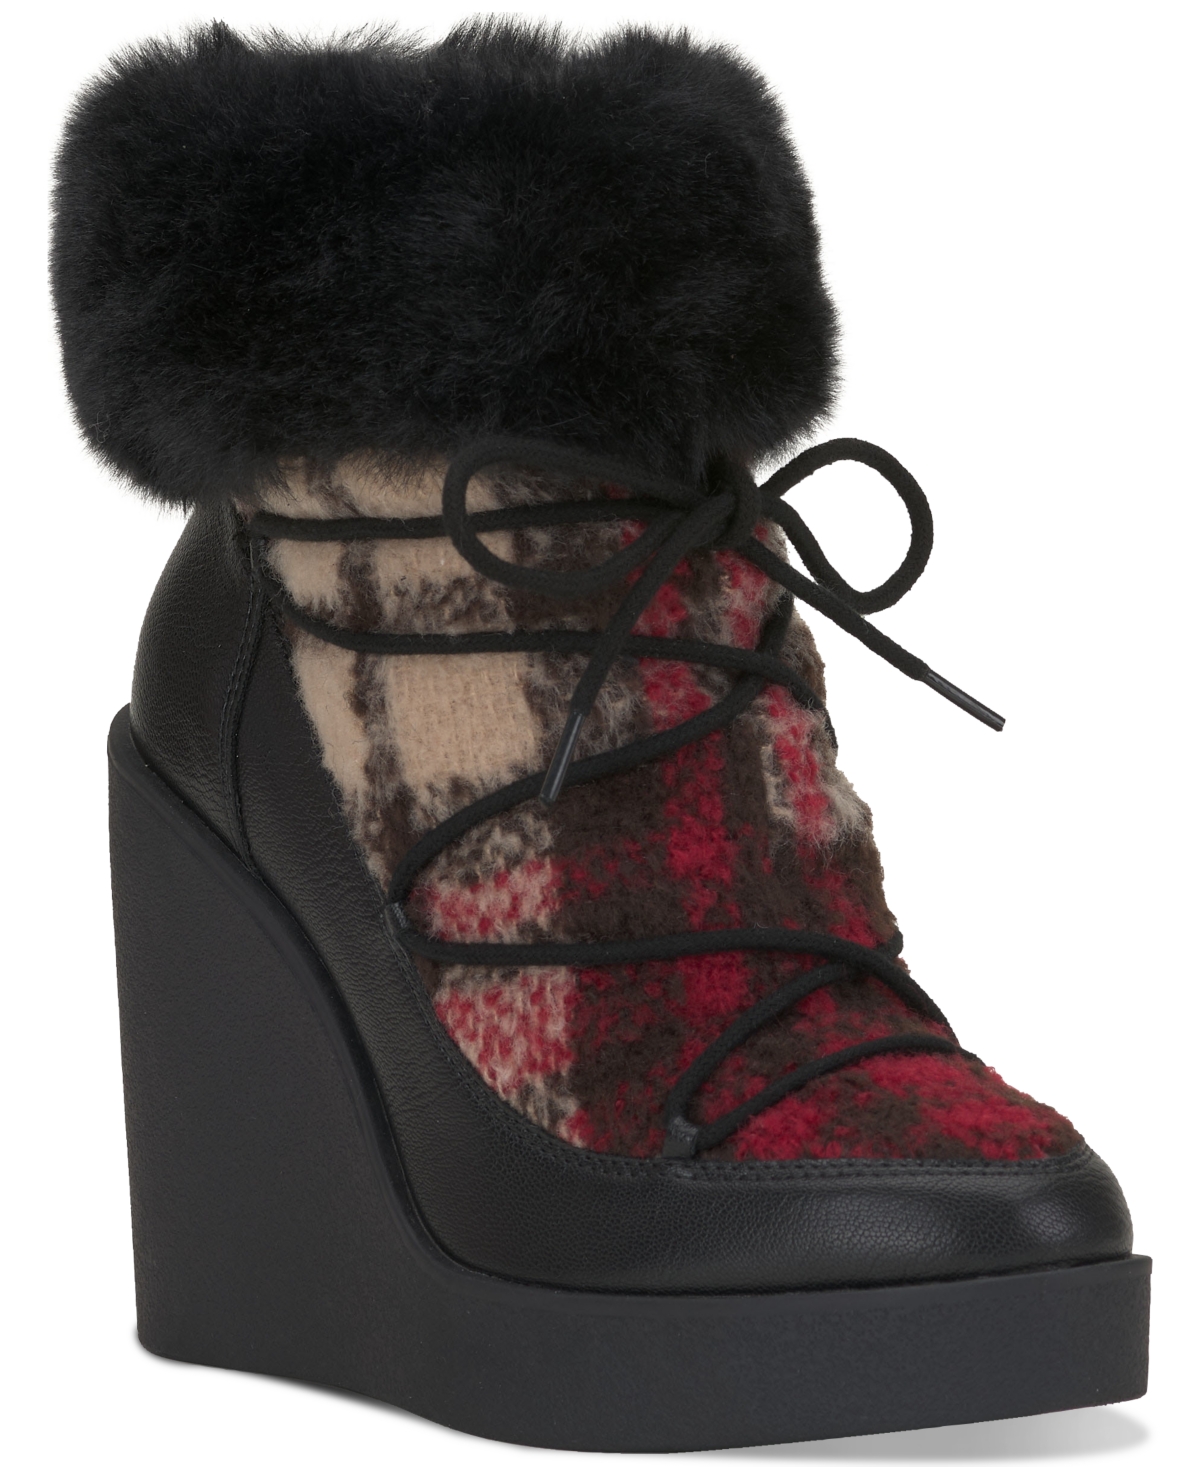 Myina Wedge Ankle Booties - Black Faux Leather/textile